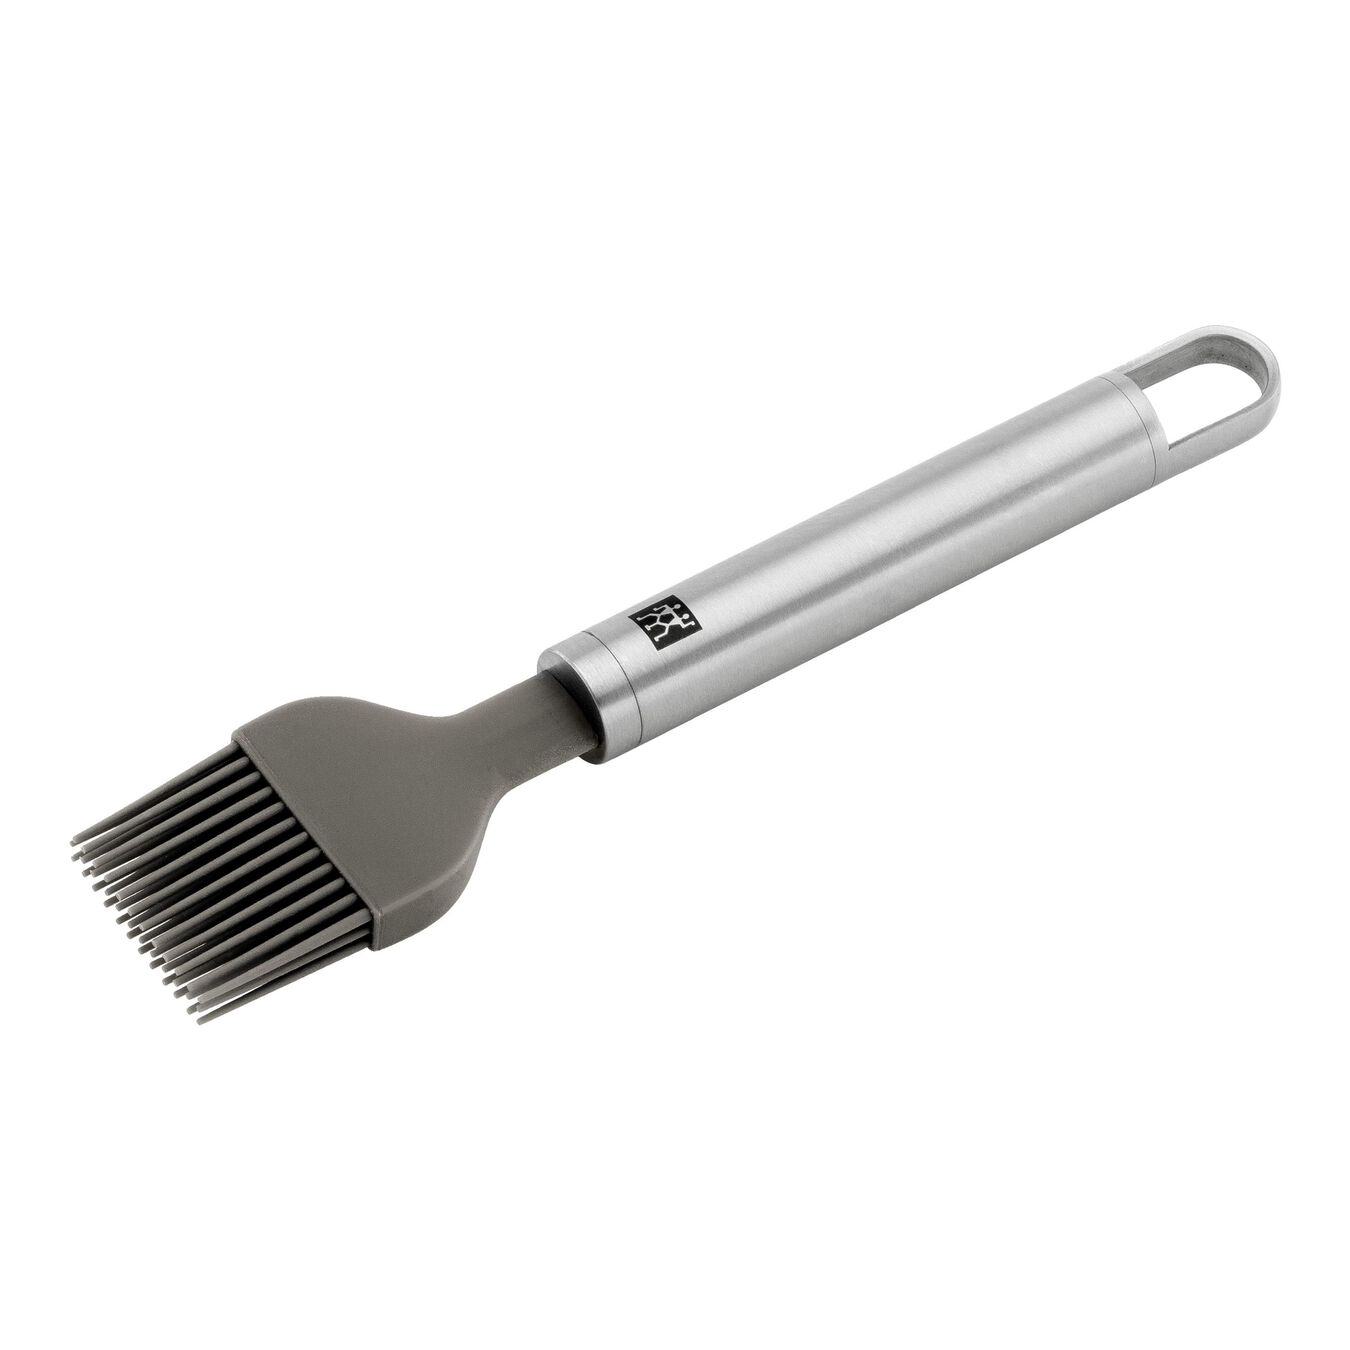 20 cm 18/10 Stainless Steel Pastry brush, silver,,large 1